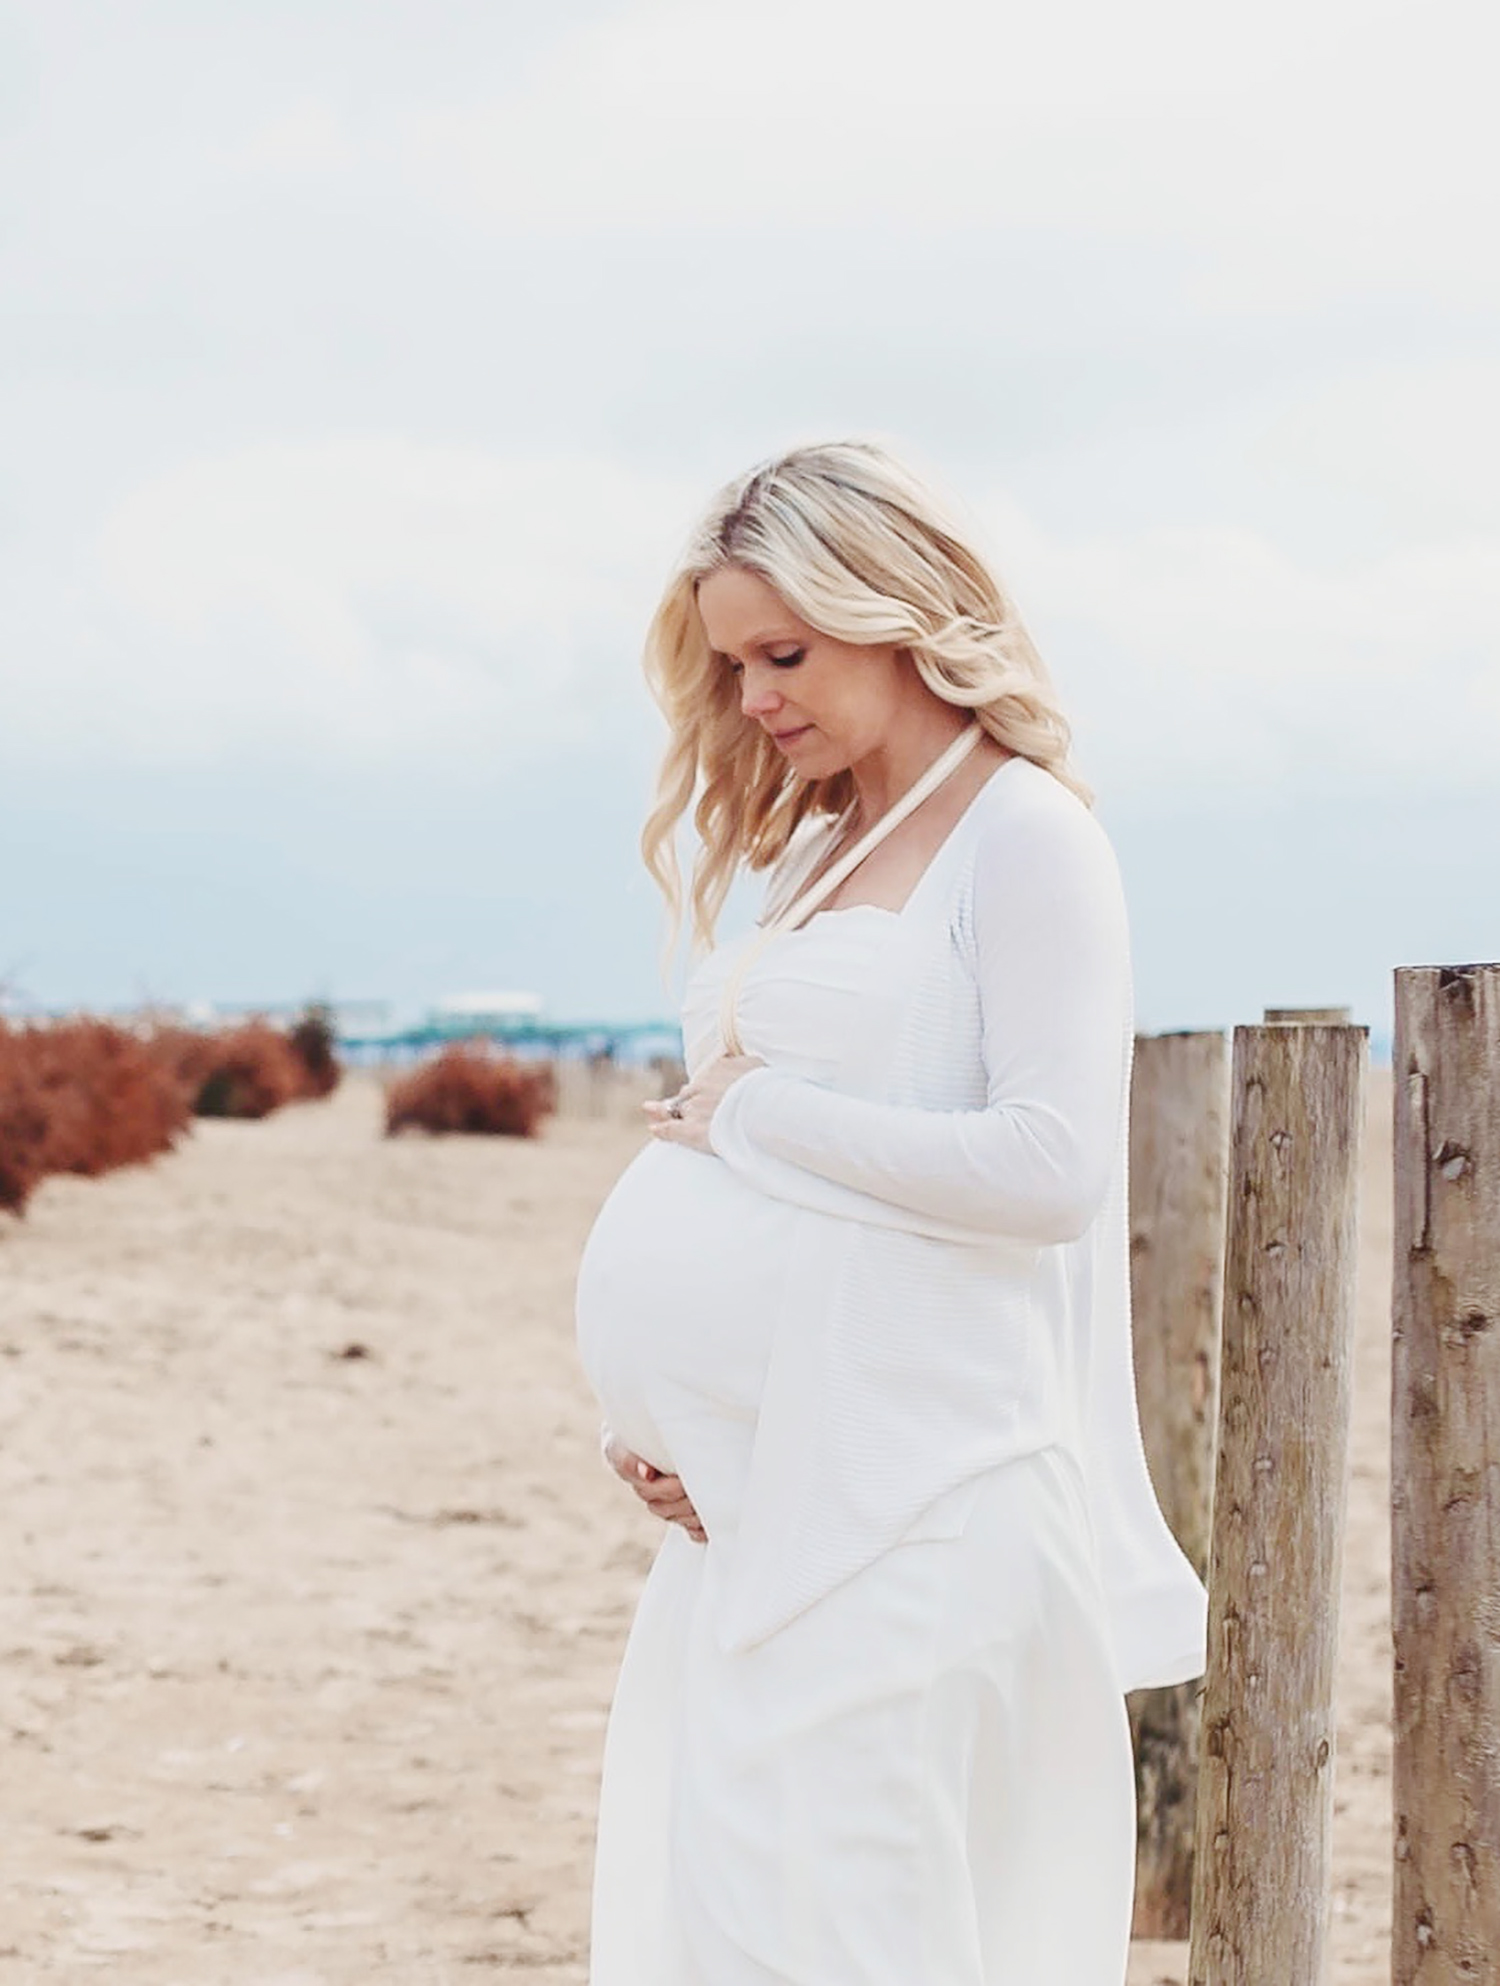 Maternity Photoshoot on the beach third pregnancy 32 weeks pregnant Robyn Swain Photography 